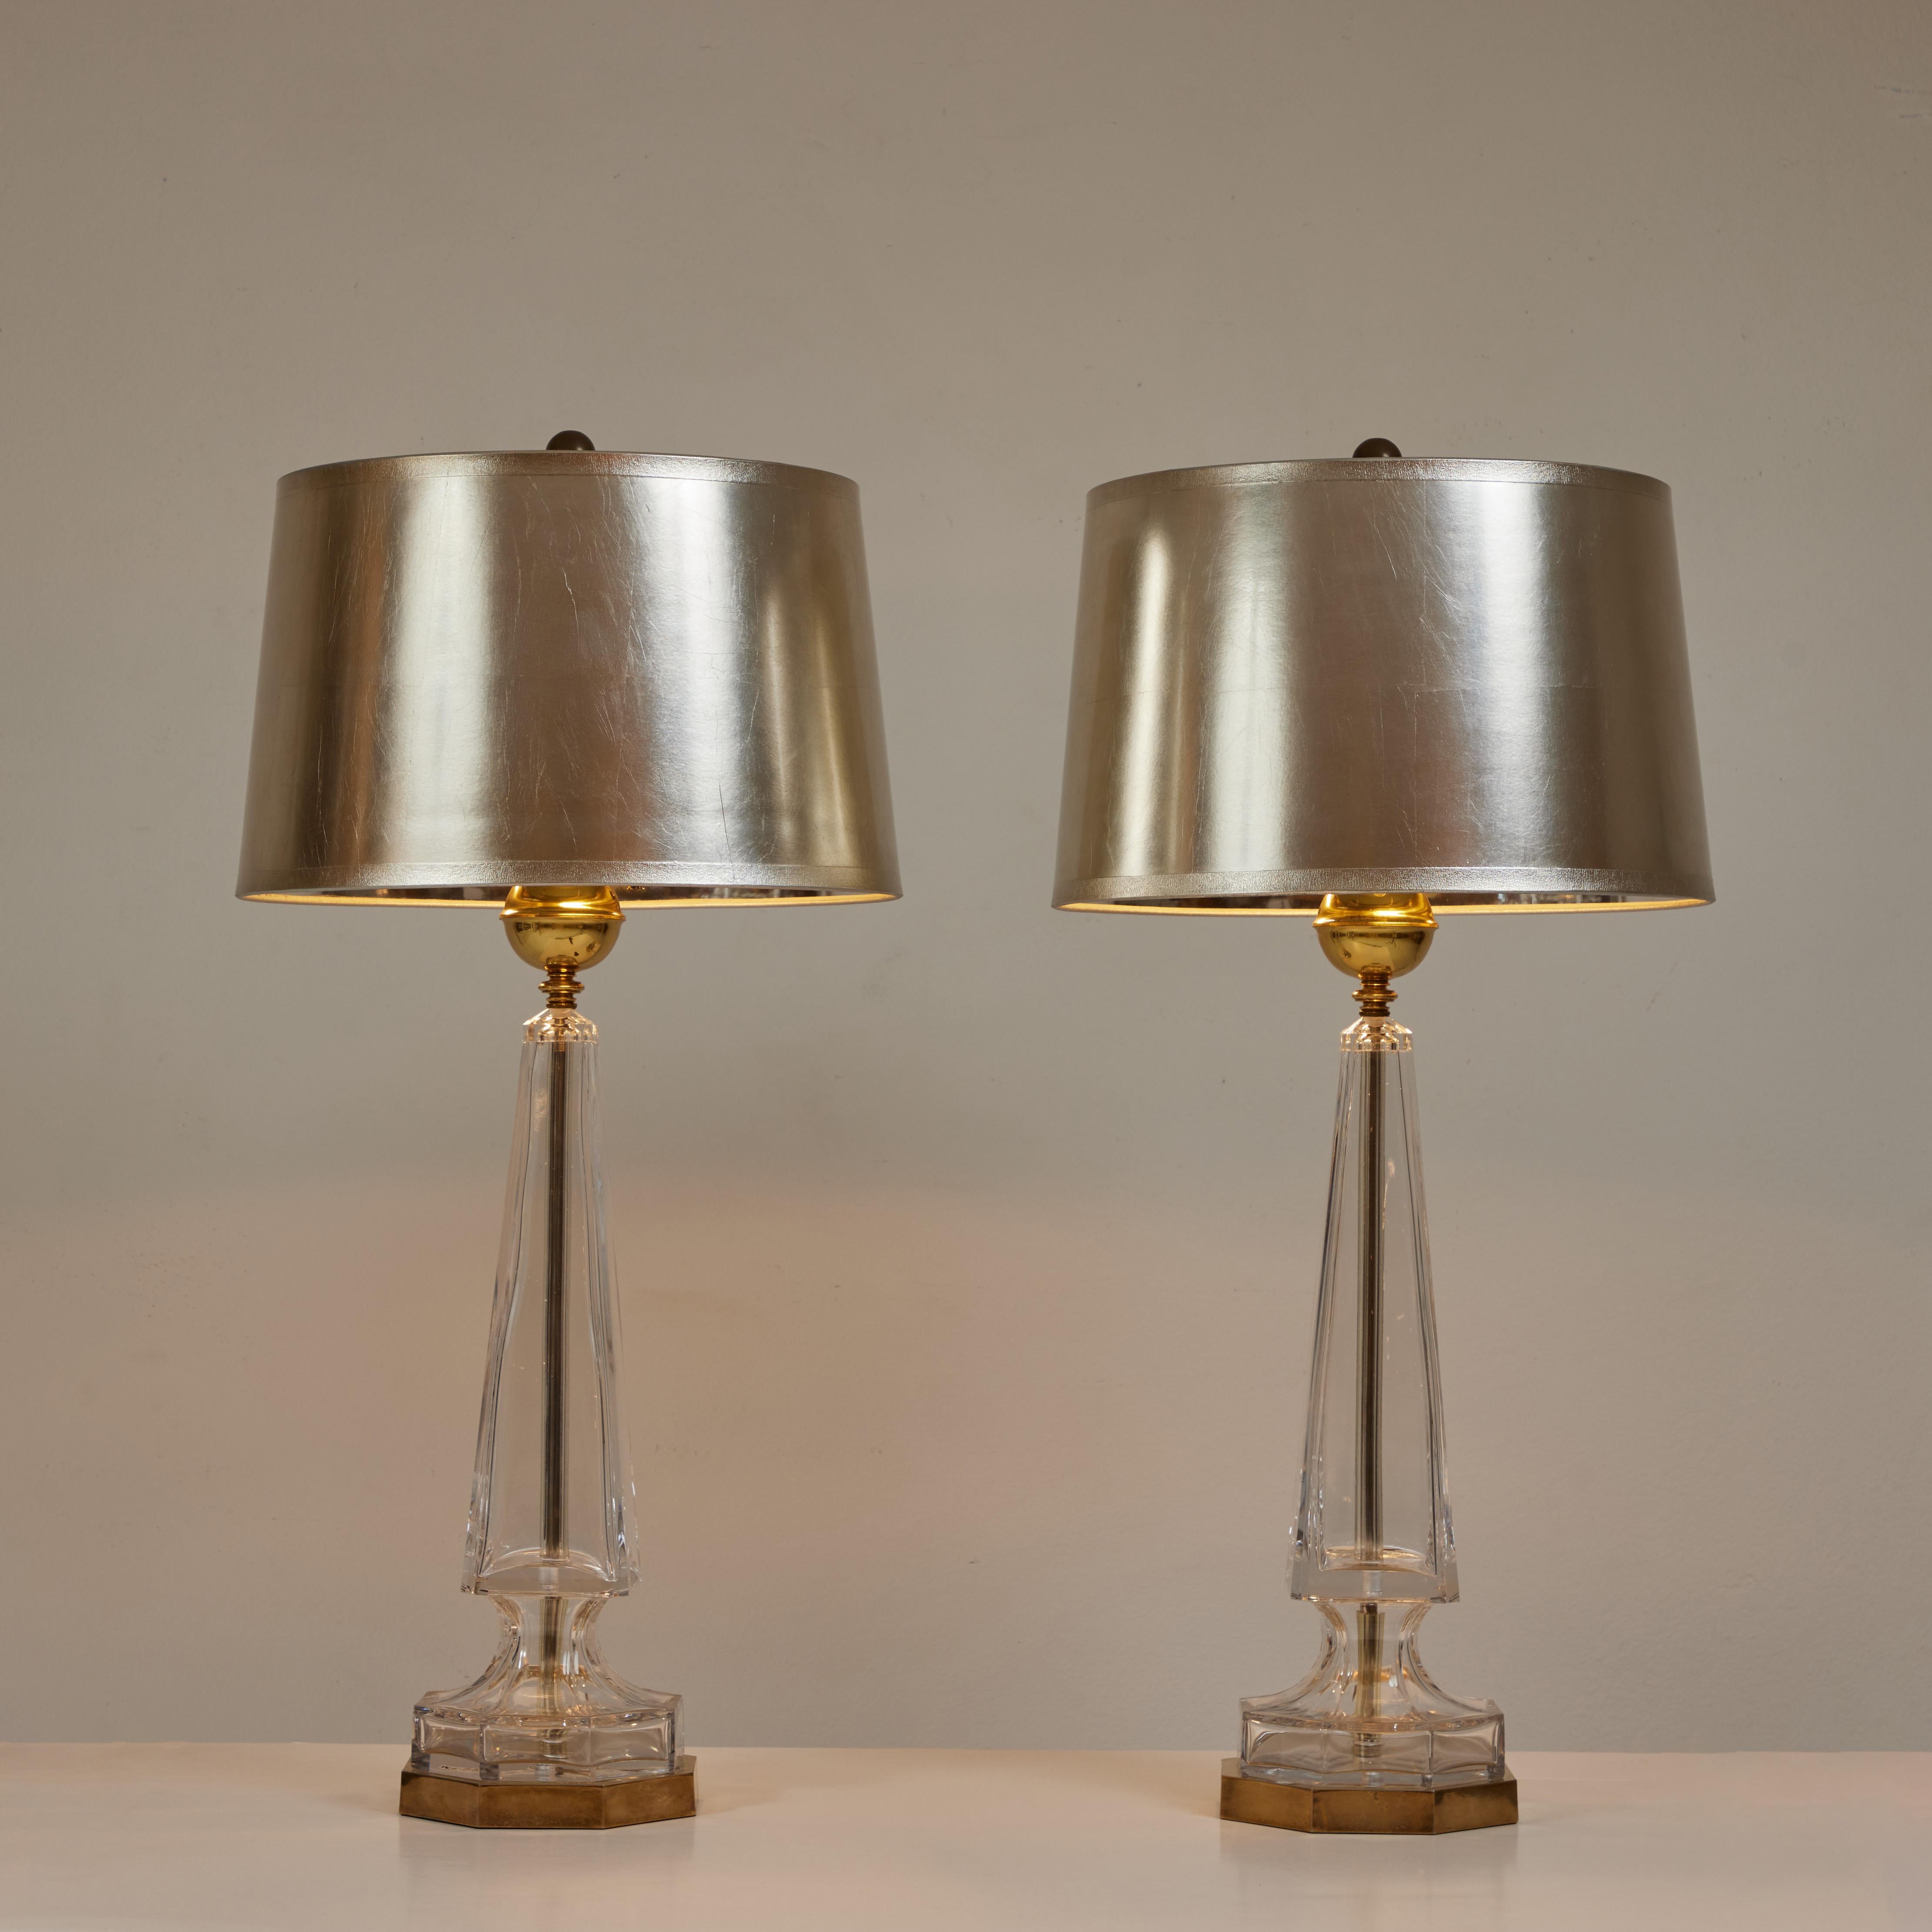 Hollywood Regency A Pair of Crystal Obelisk Lamps with Silver Leafed Shades, Chapman Lamps 1976 For Sale